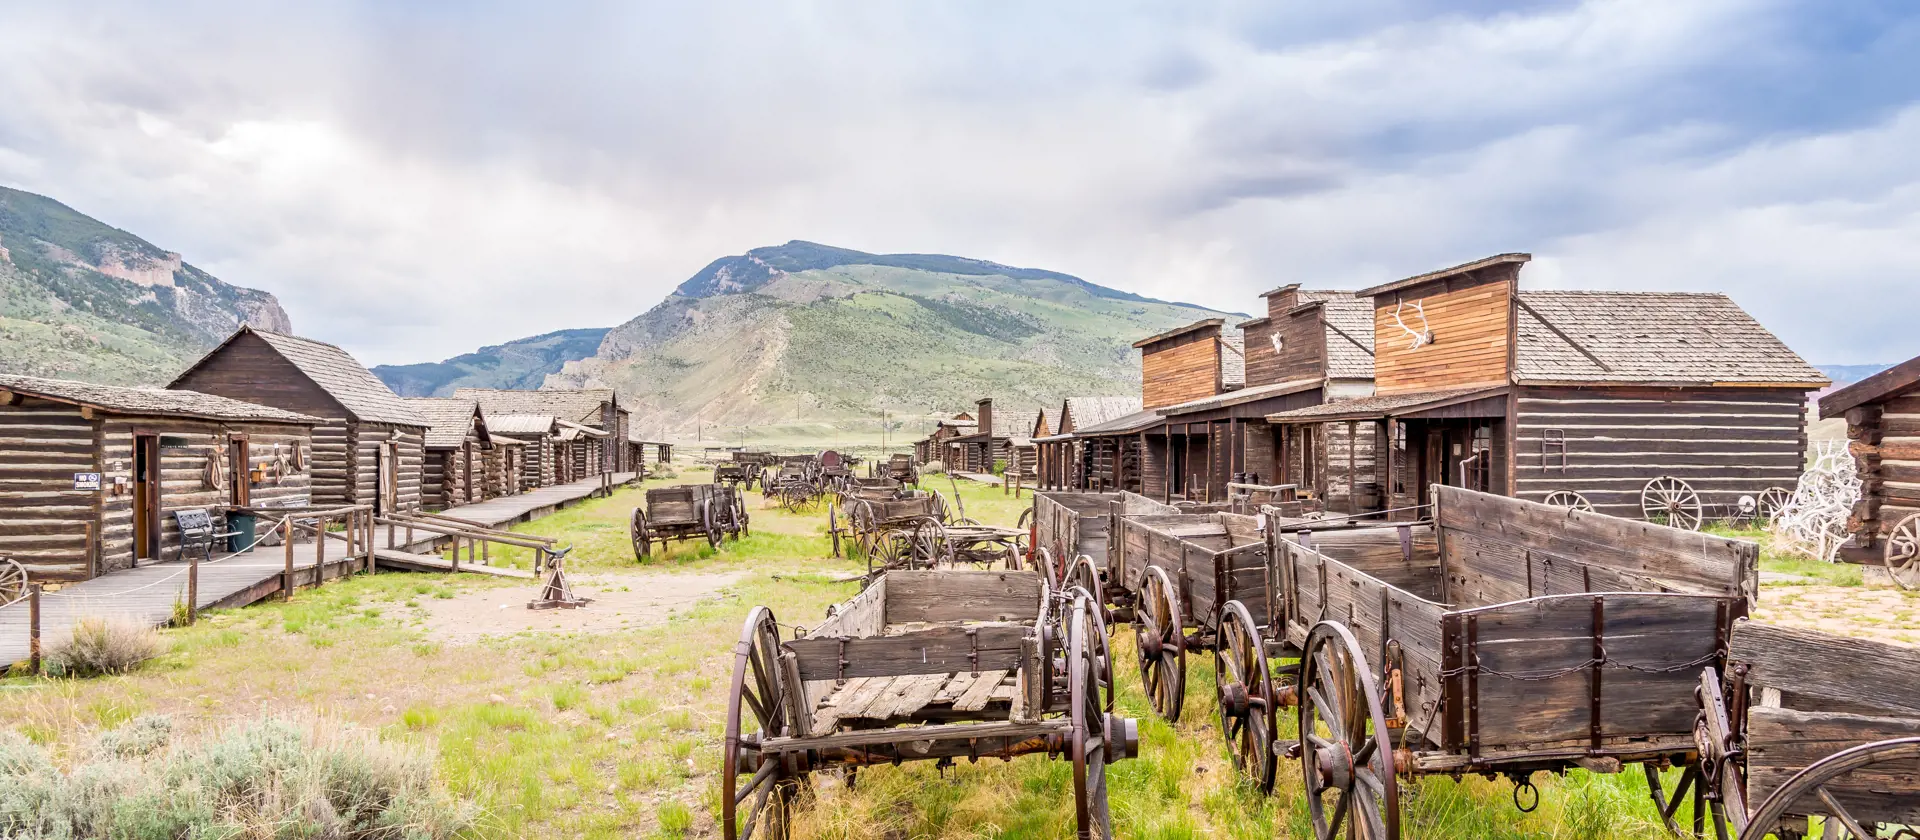 dag 9shutterstock_292631978 Cody is a city in Park County. Old Trail Town is historic western buildings..jpg